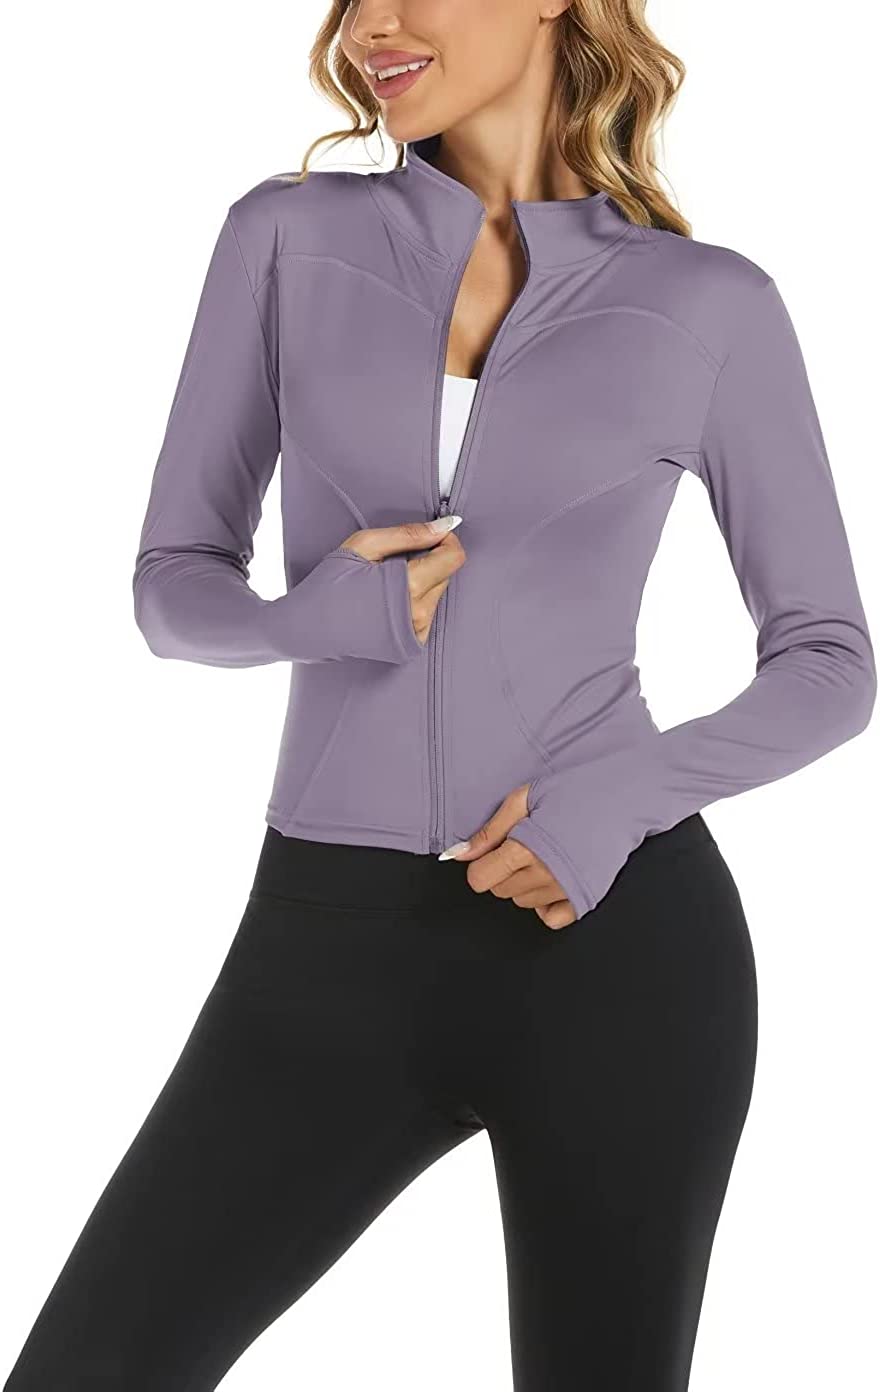 Aolpioon Women's Workout Jacket Yoga Running Slim Fit Stretchy Full Zip  Athletic | eBay